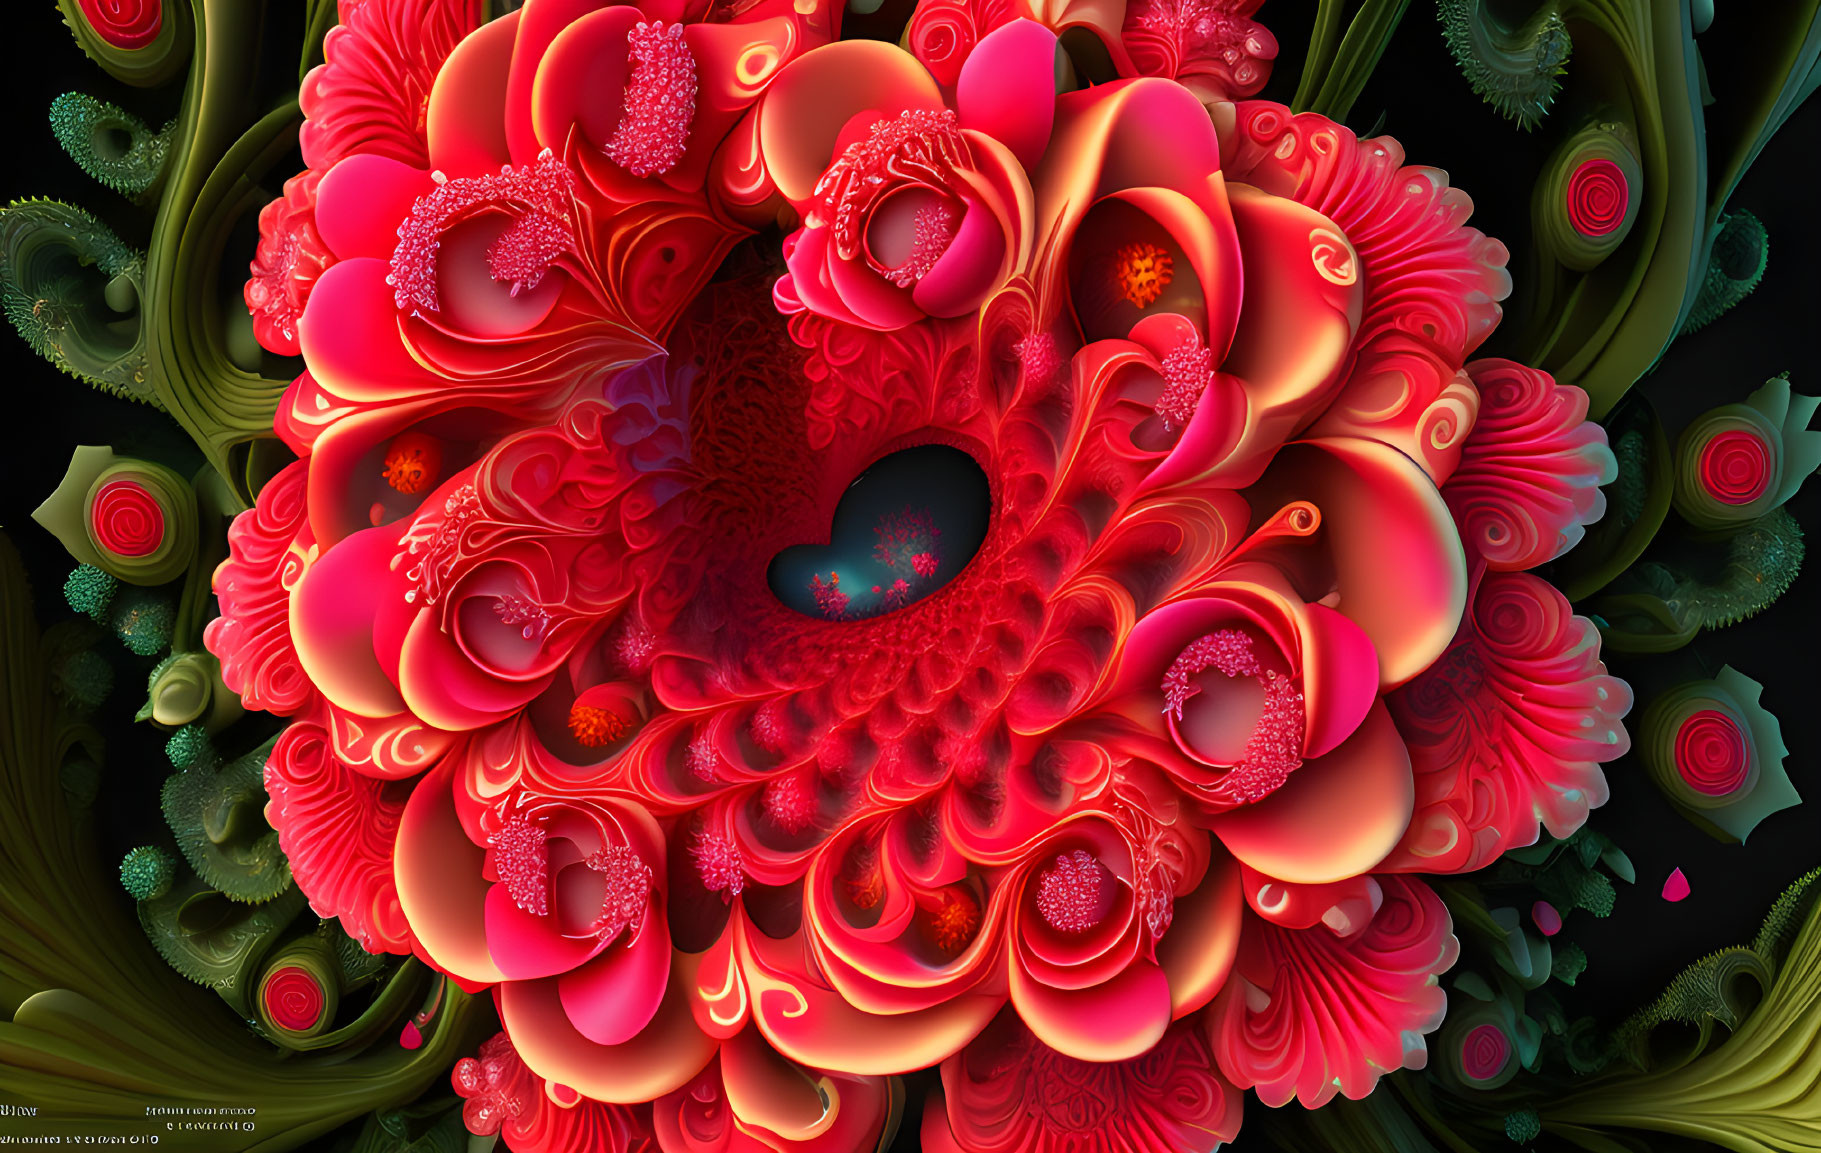 Colorful Heart-Shaped Digital Artwork with Floral and Fractal Elements